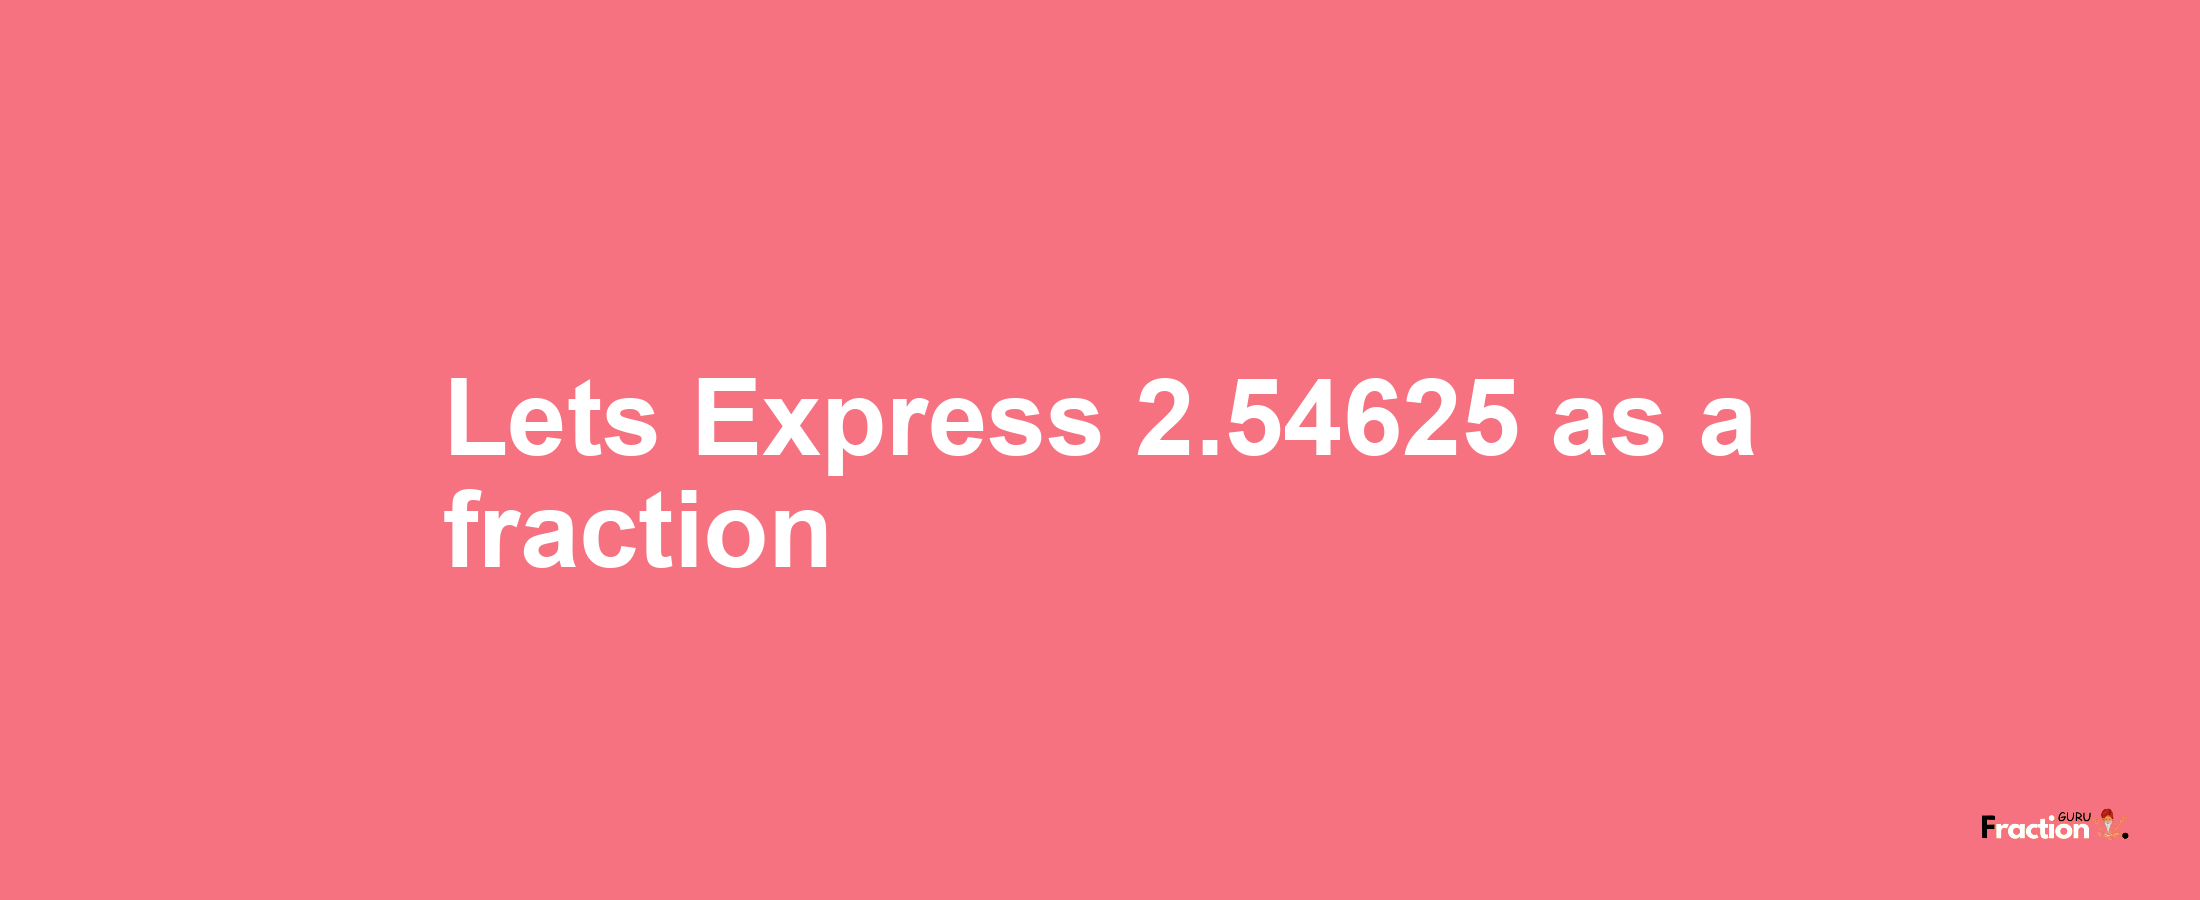 Lets Express 2.54625 as afraction